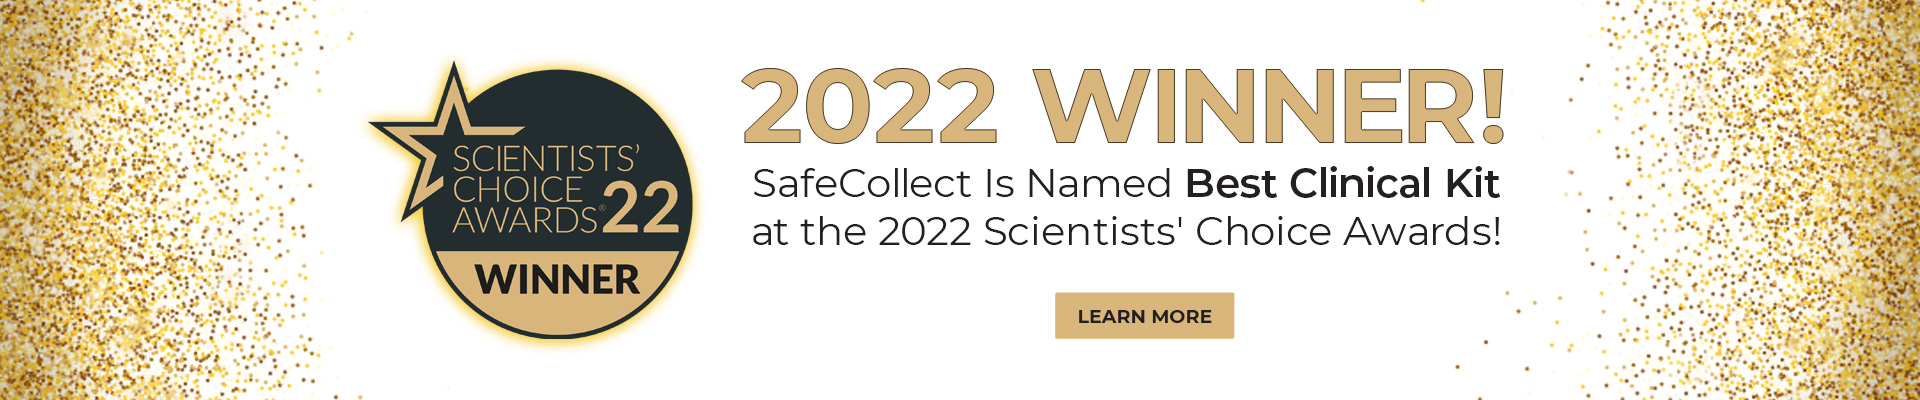 Banner for SafeCollect's Award from SelectScience